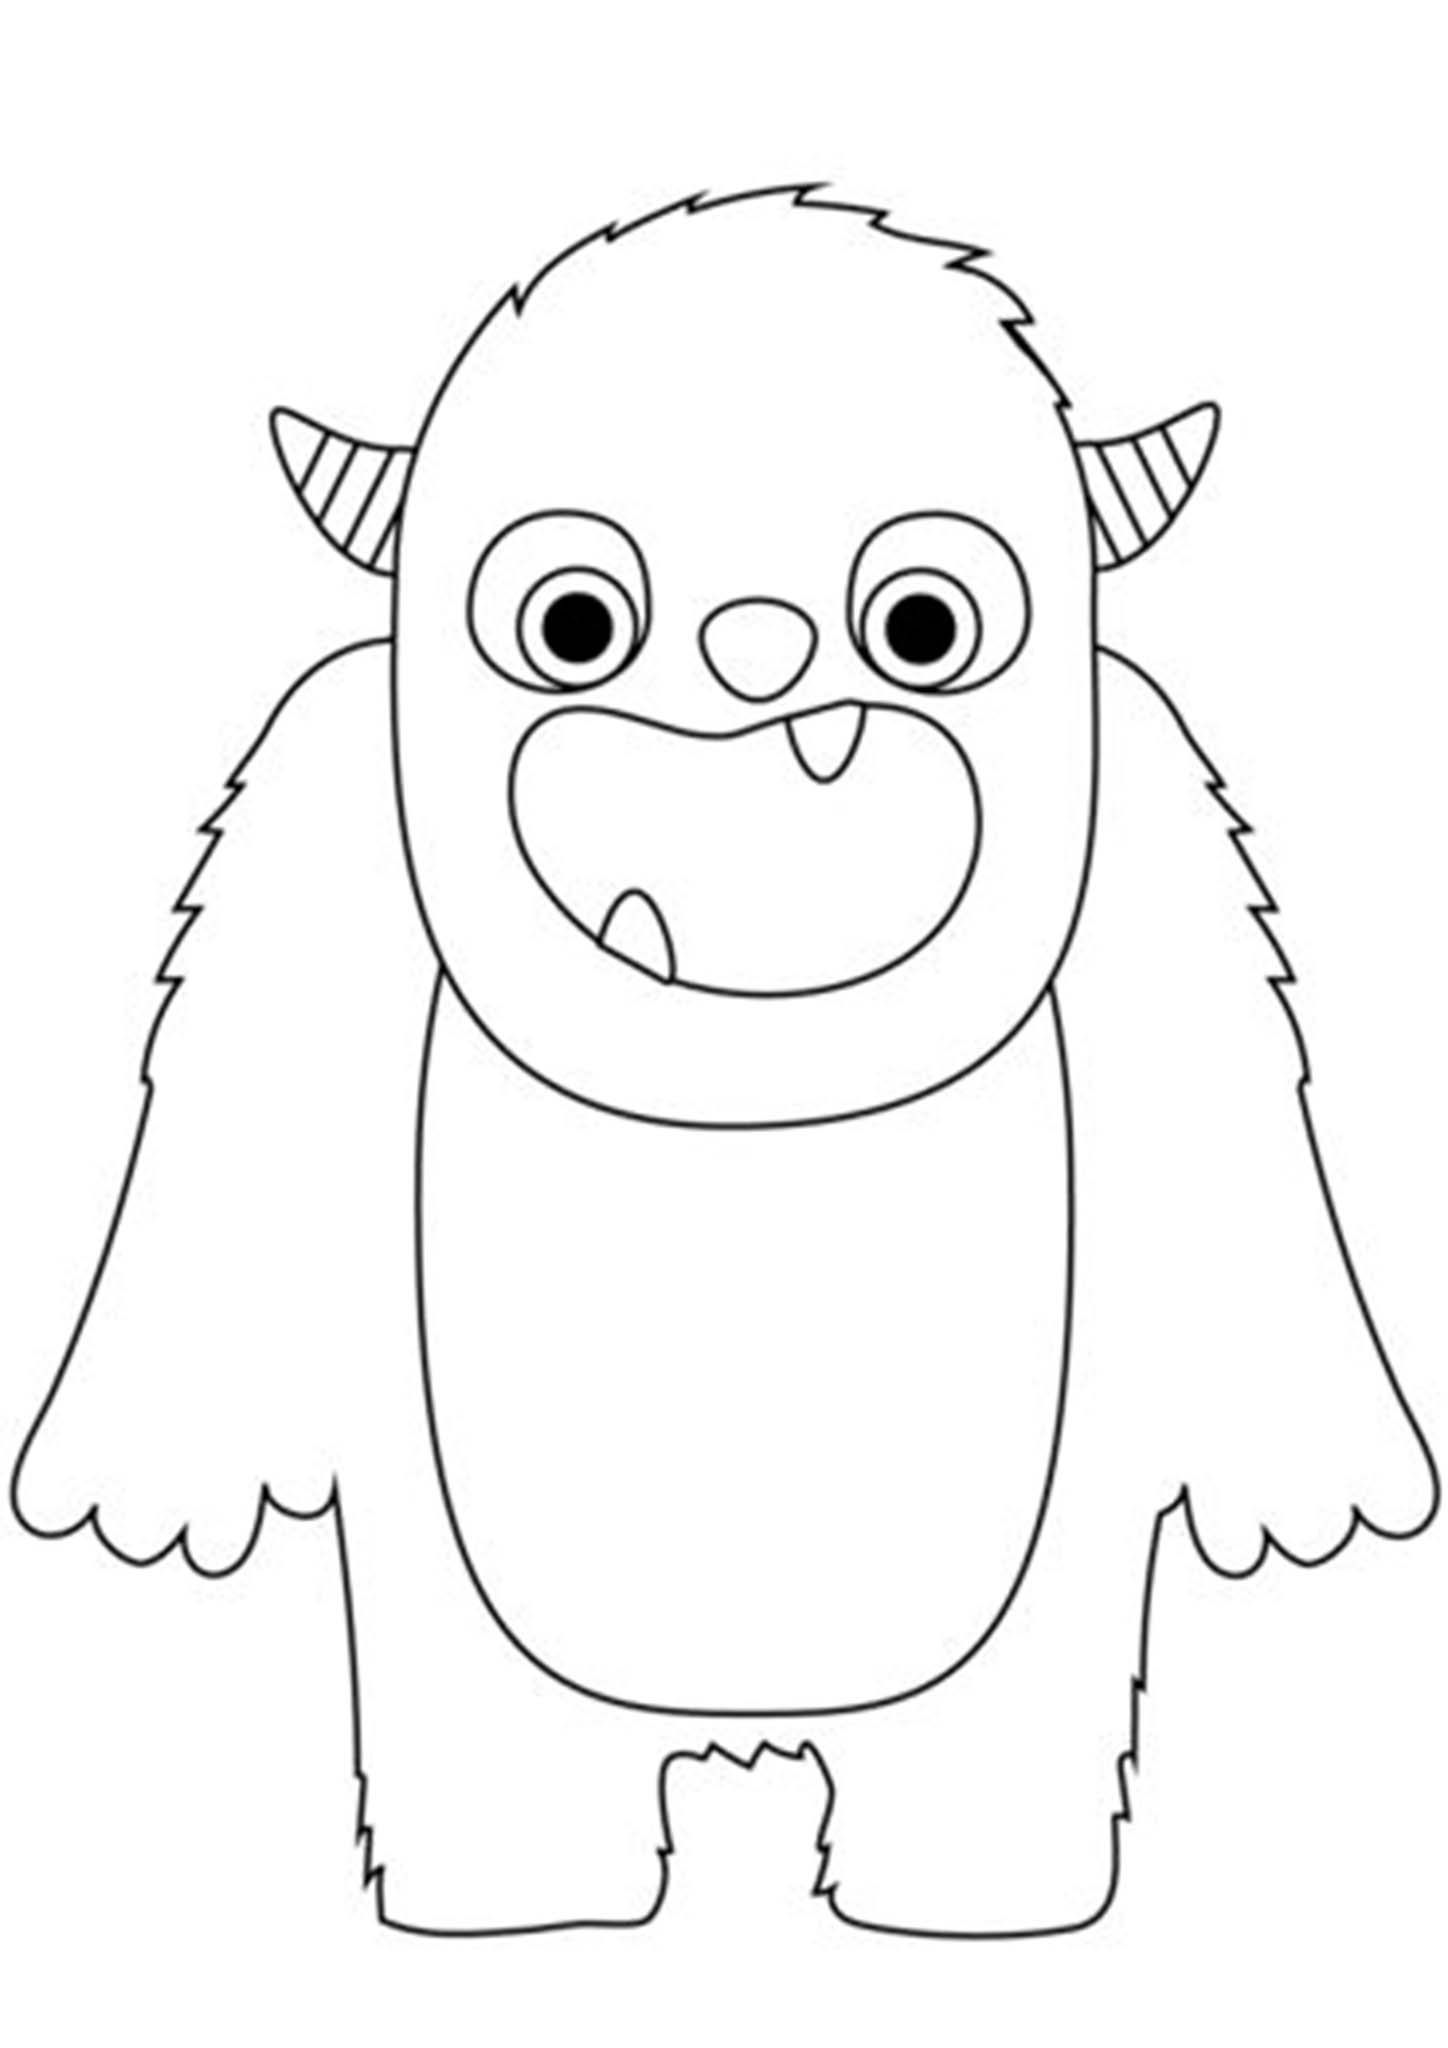 Free easy to print monster coloring pages